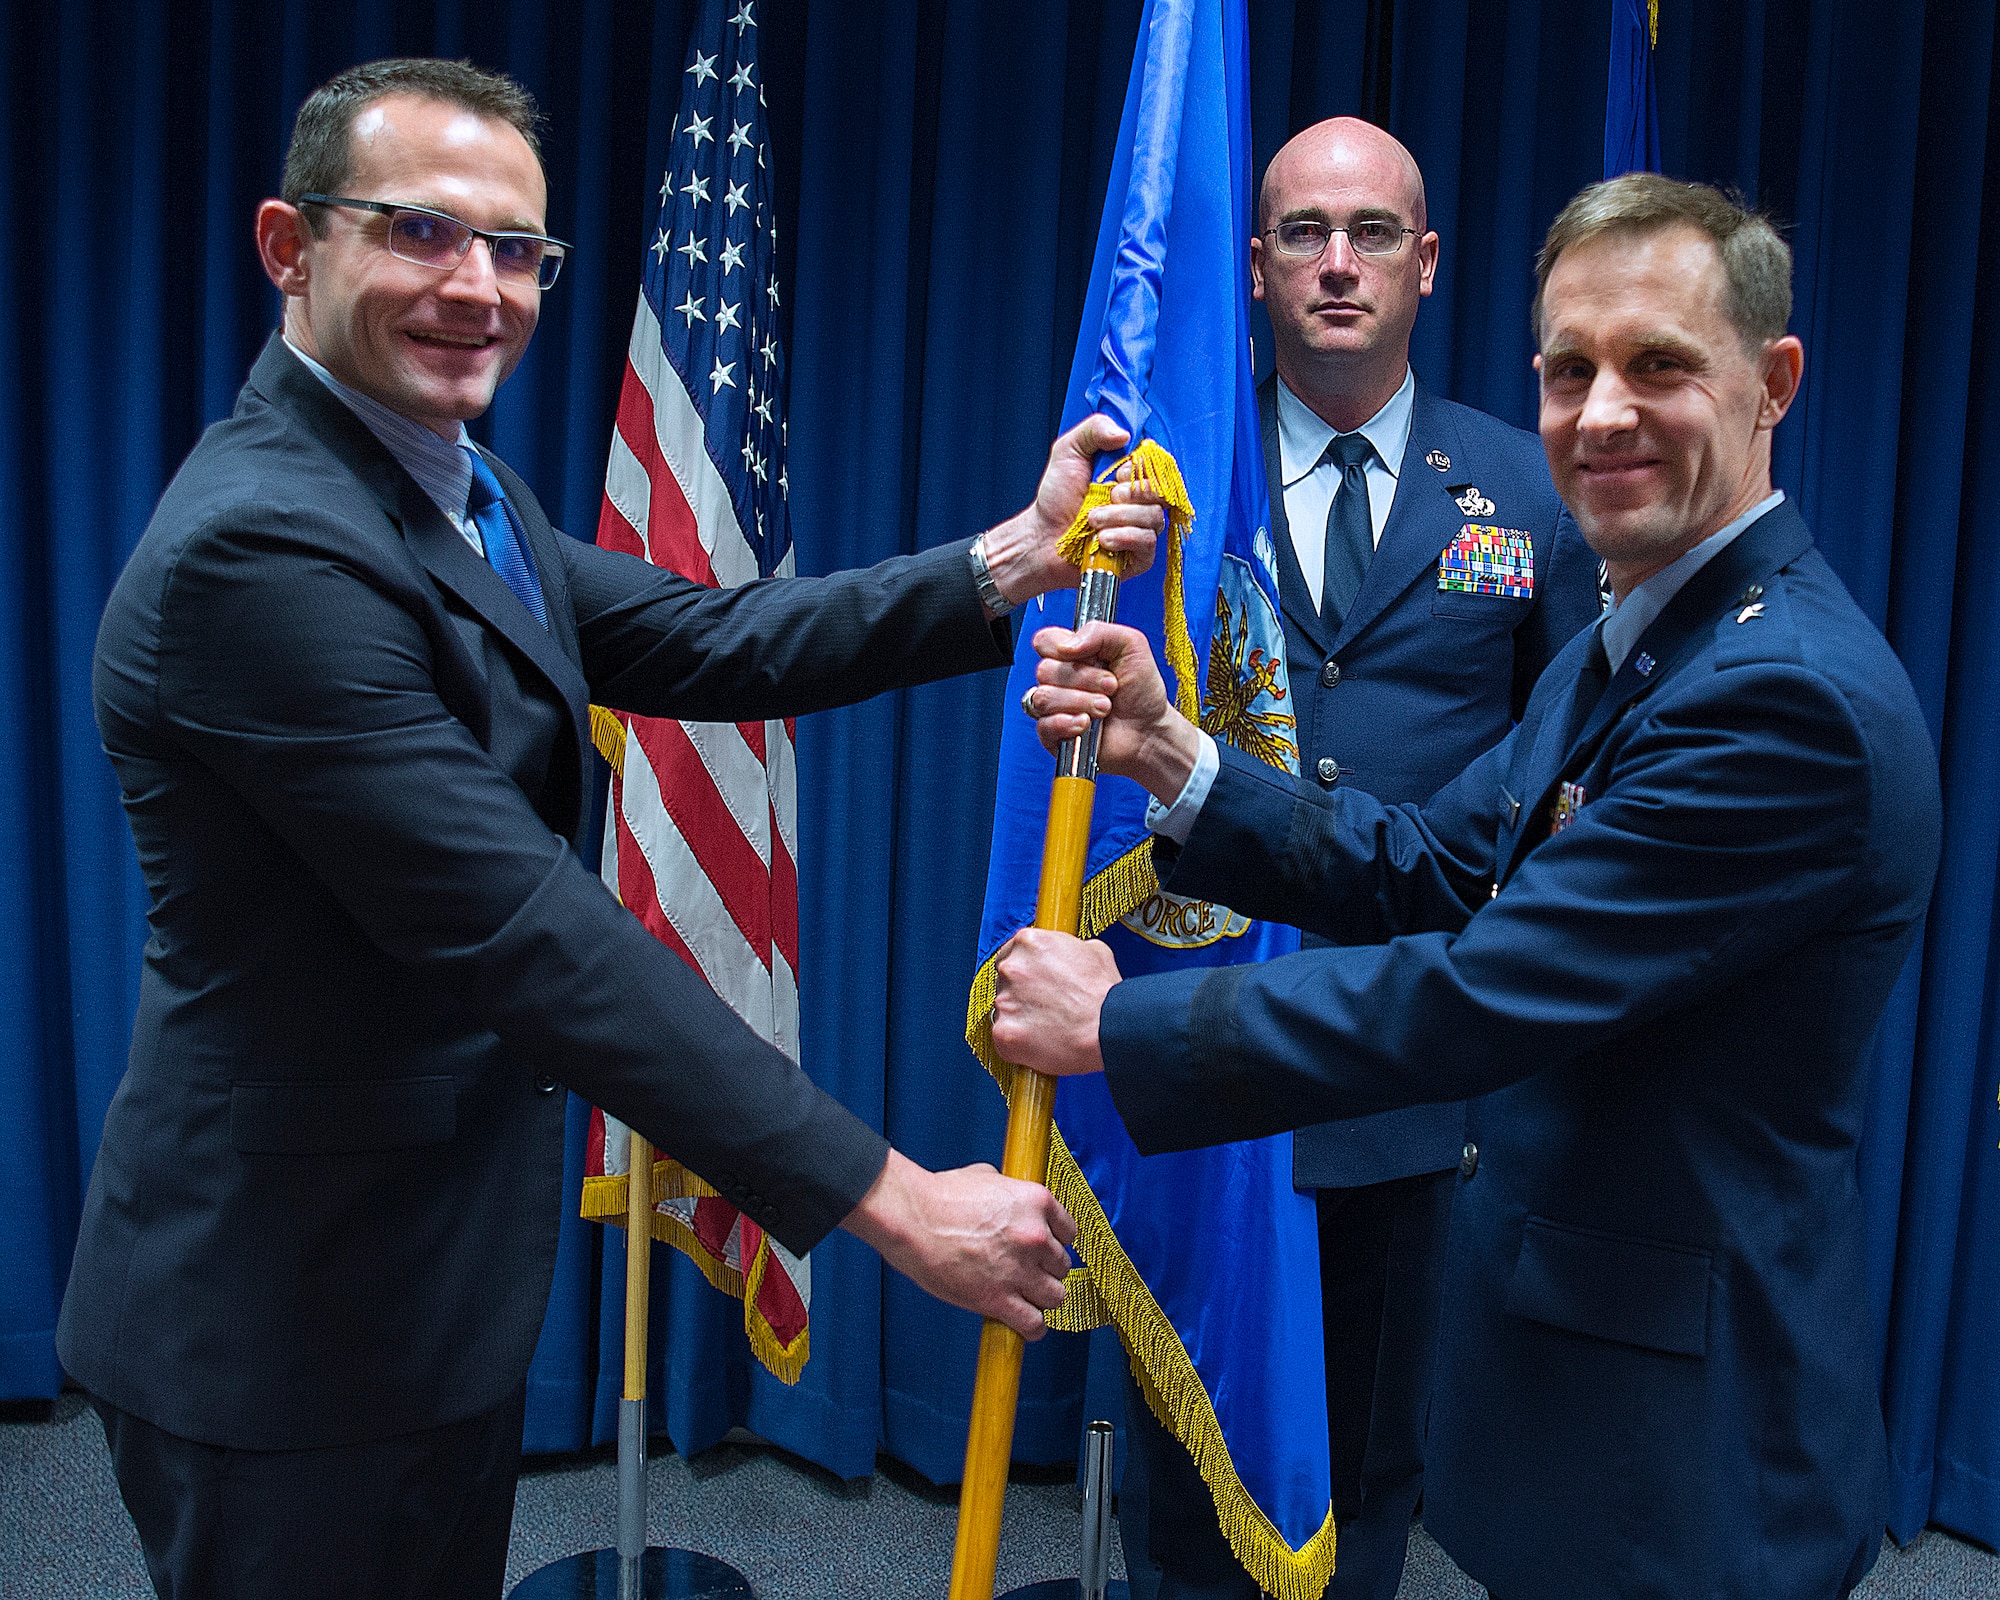 Dr. Will Roper, U.S. Air Force Assistant Secretary for Acquisition, Technology and Logistics, presents Brig. Gen. John P. Newberry with a guidon, May 31, 2019 as Newberry assumes leadership of the directorate during a ceremony at Wright-Patterson Air Force Base Ohio. Senior Master Sgt. Shawn R. Akers, Tanker Directorate superintendent stands by to take the guidon from Newberry. (U.S. Air Force photo by R.J. Oriez)